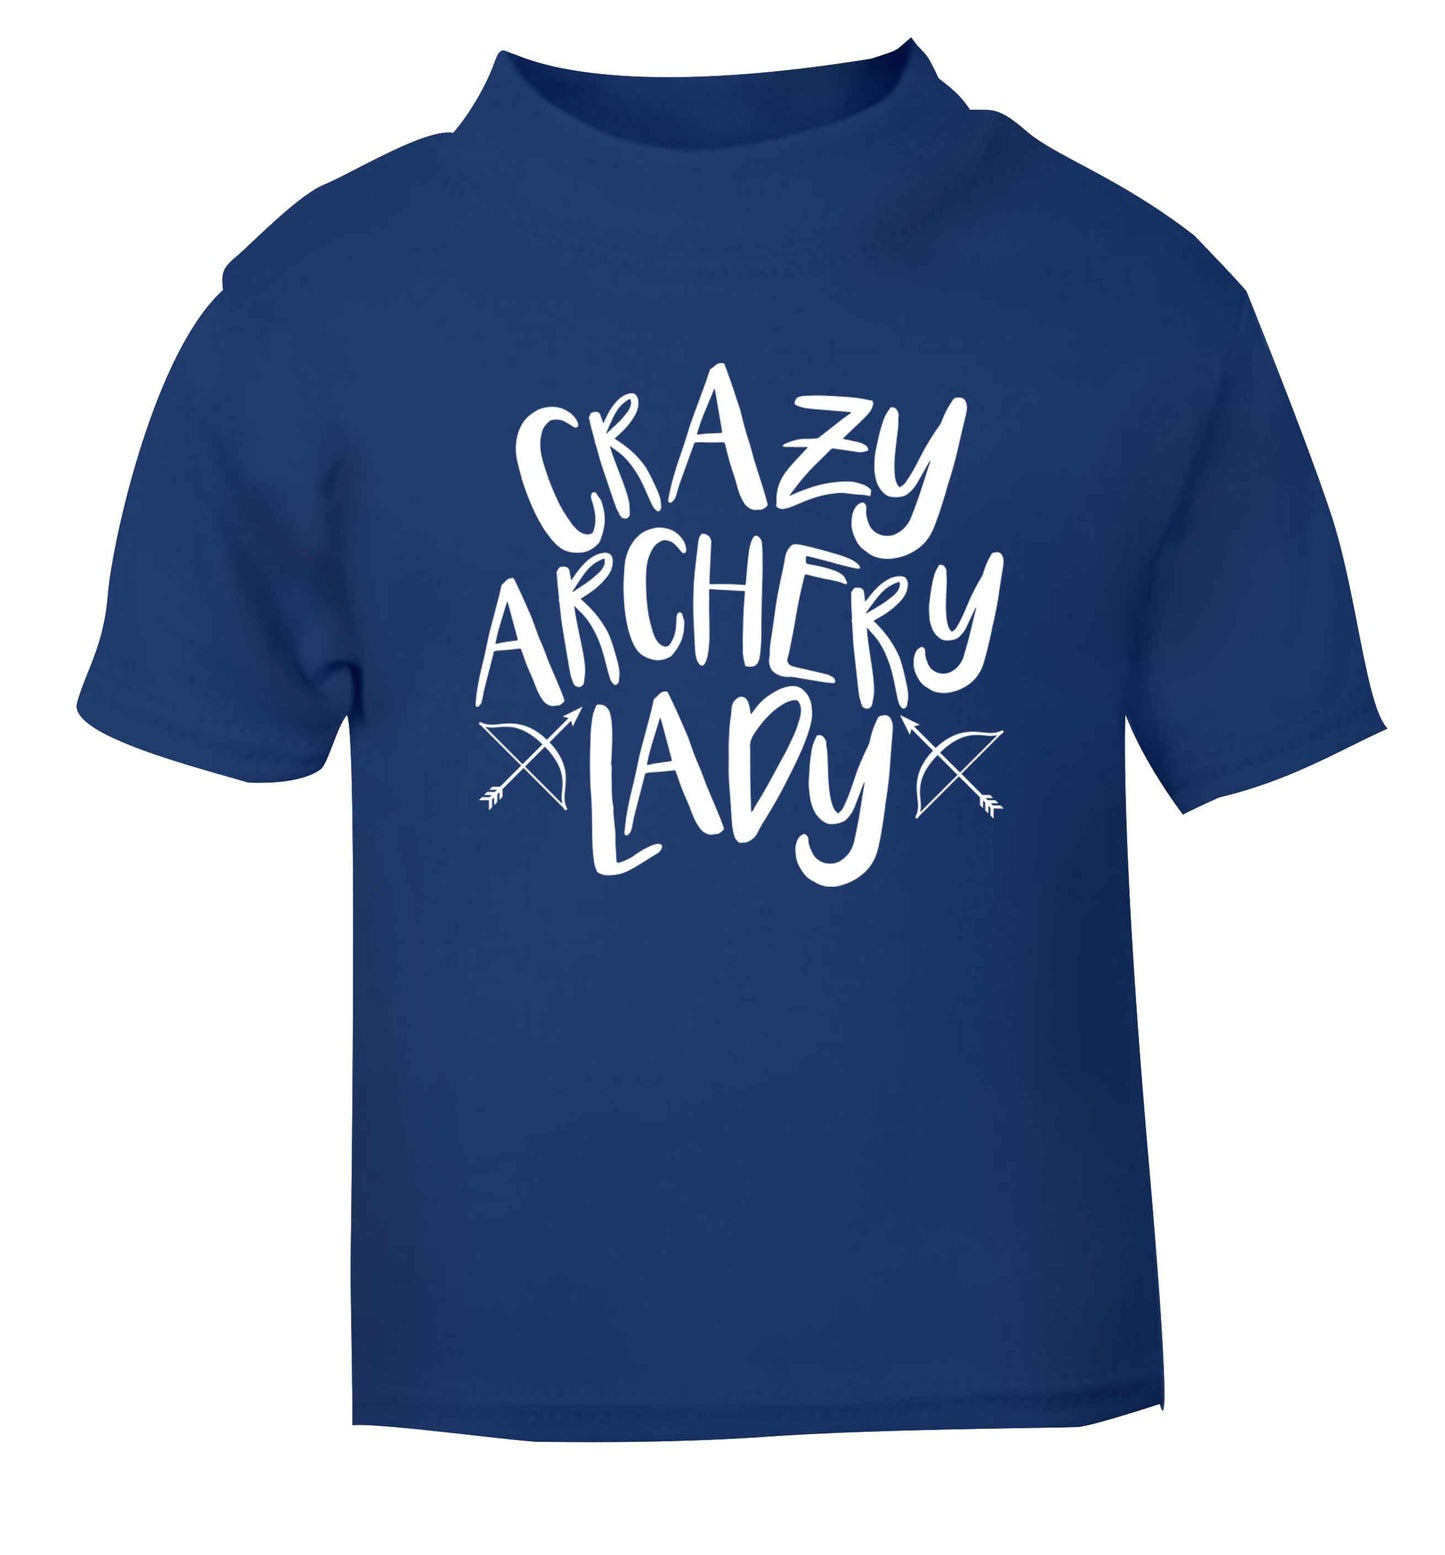 Crazy archery lady blue Baby Toddler Tshirt 2 Years